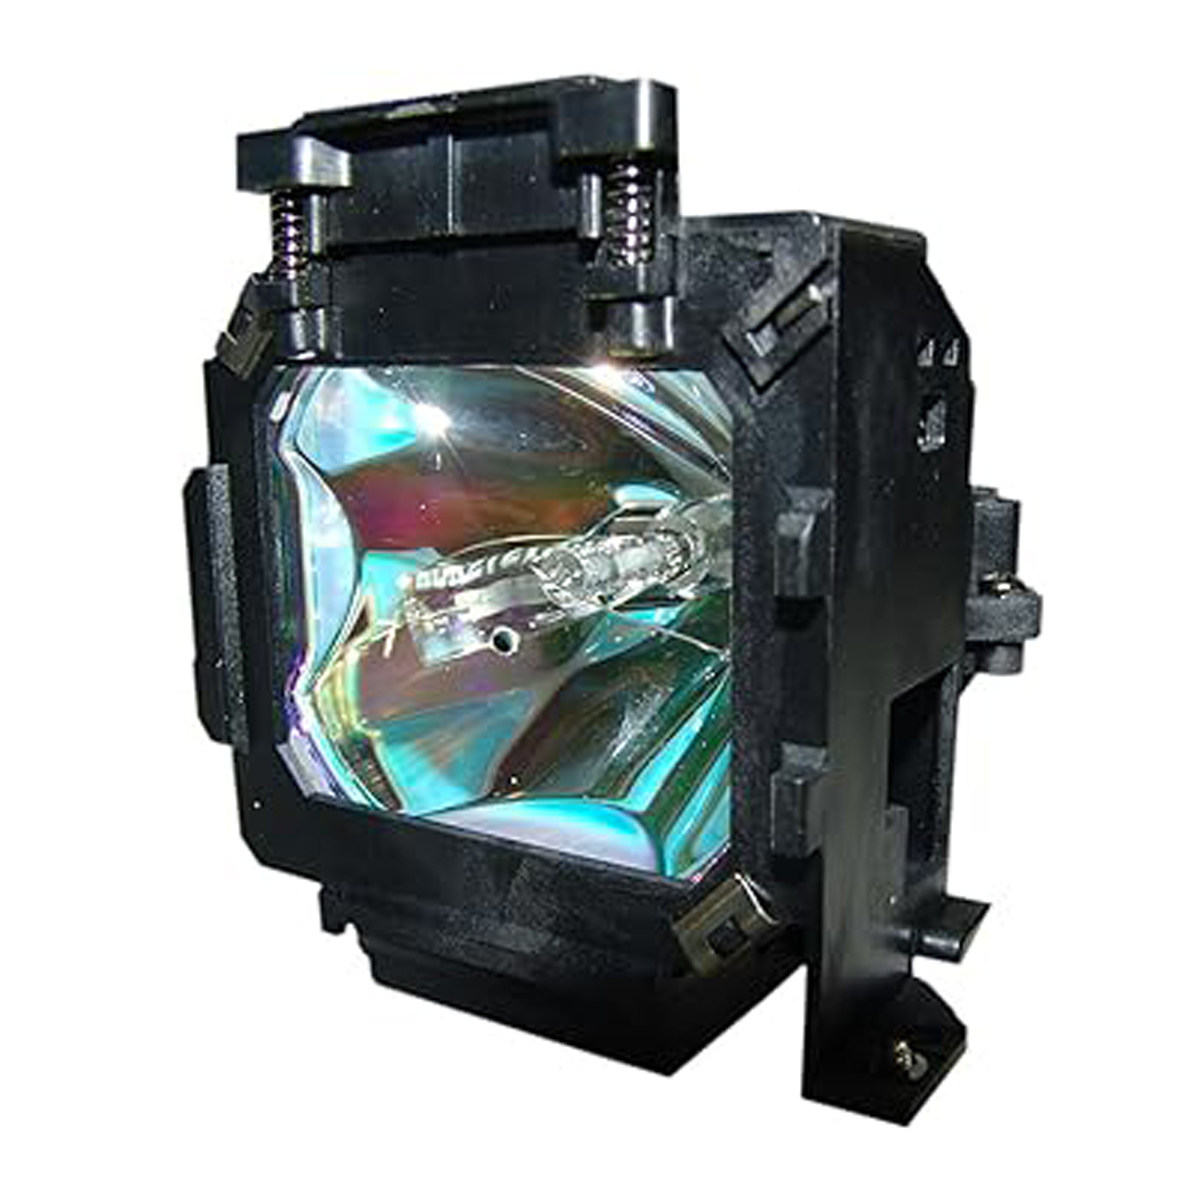 Replacement Projector lamp ELPLP17 For Epson EMP-TS10/EMP-TW100/PowerLite TW100